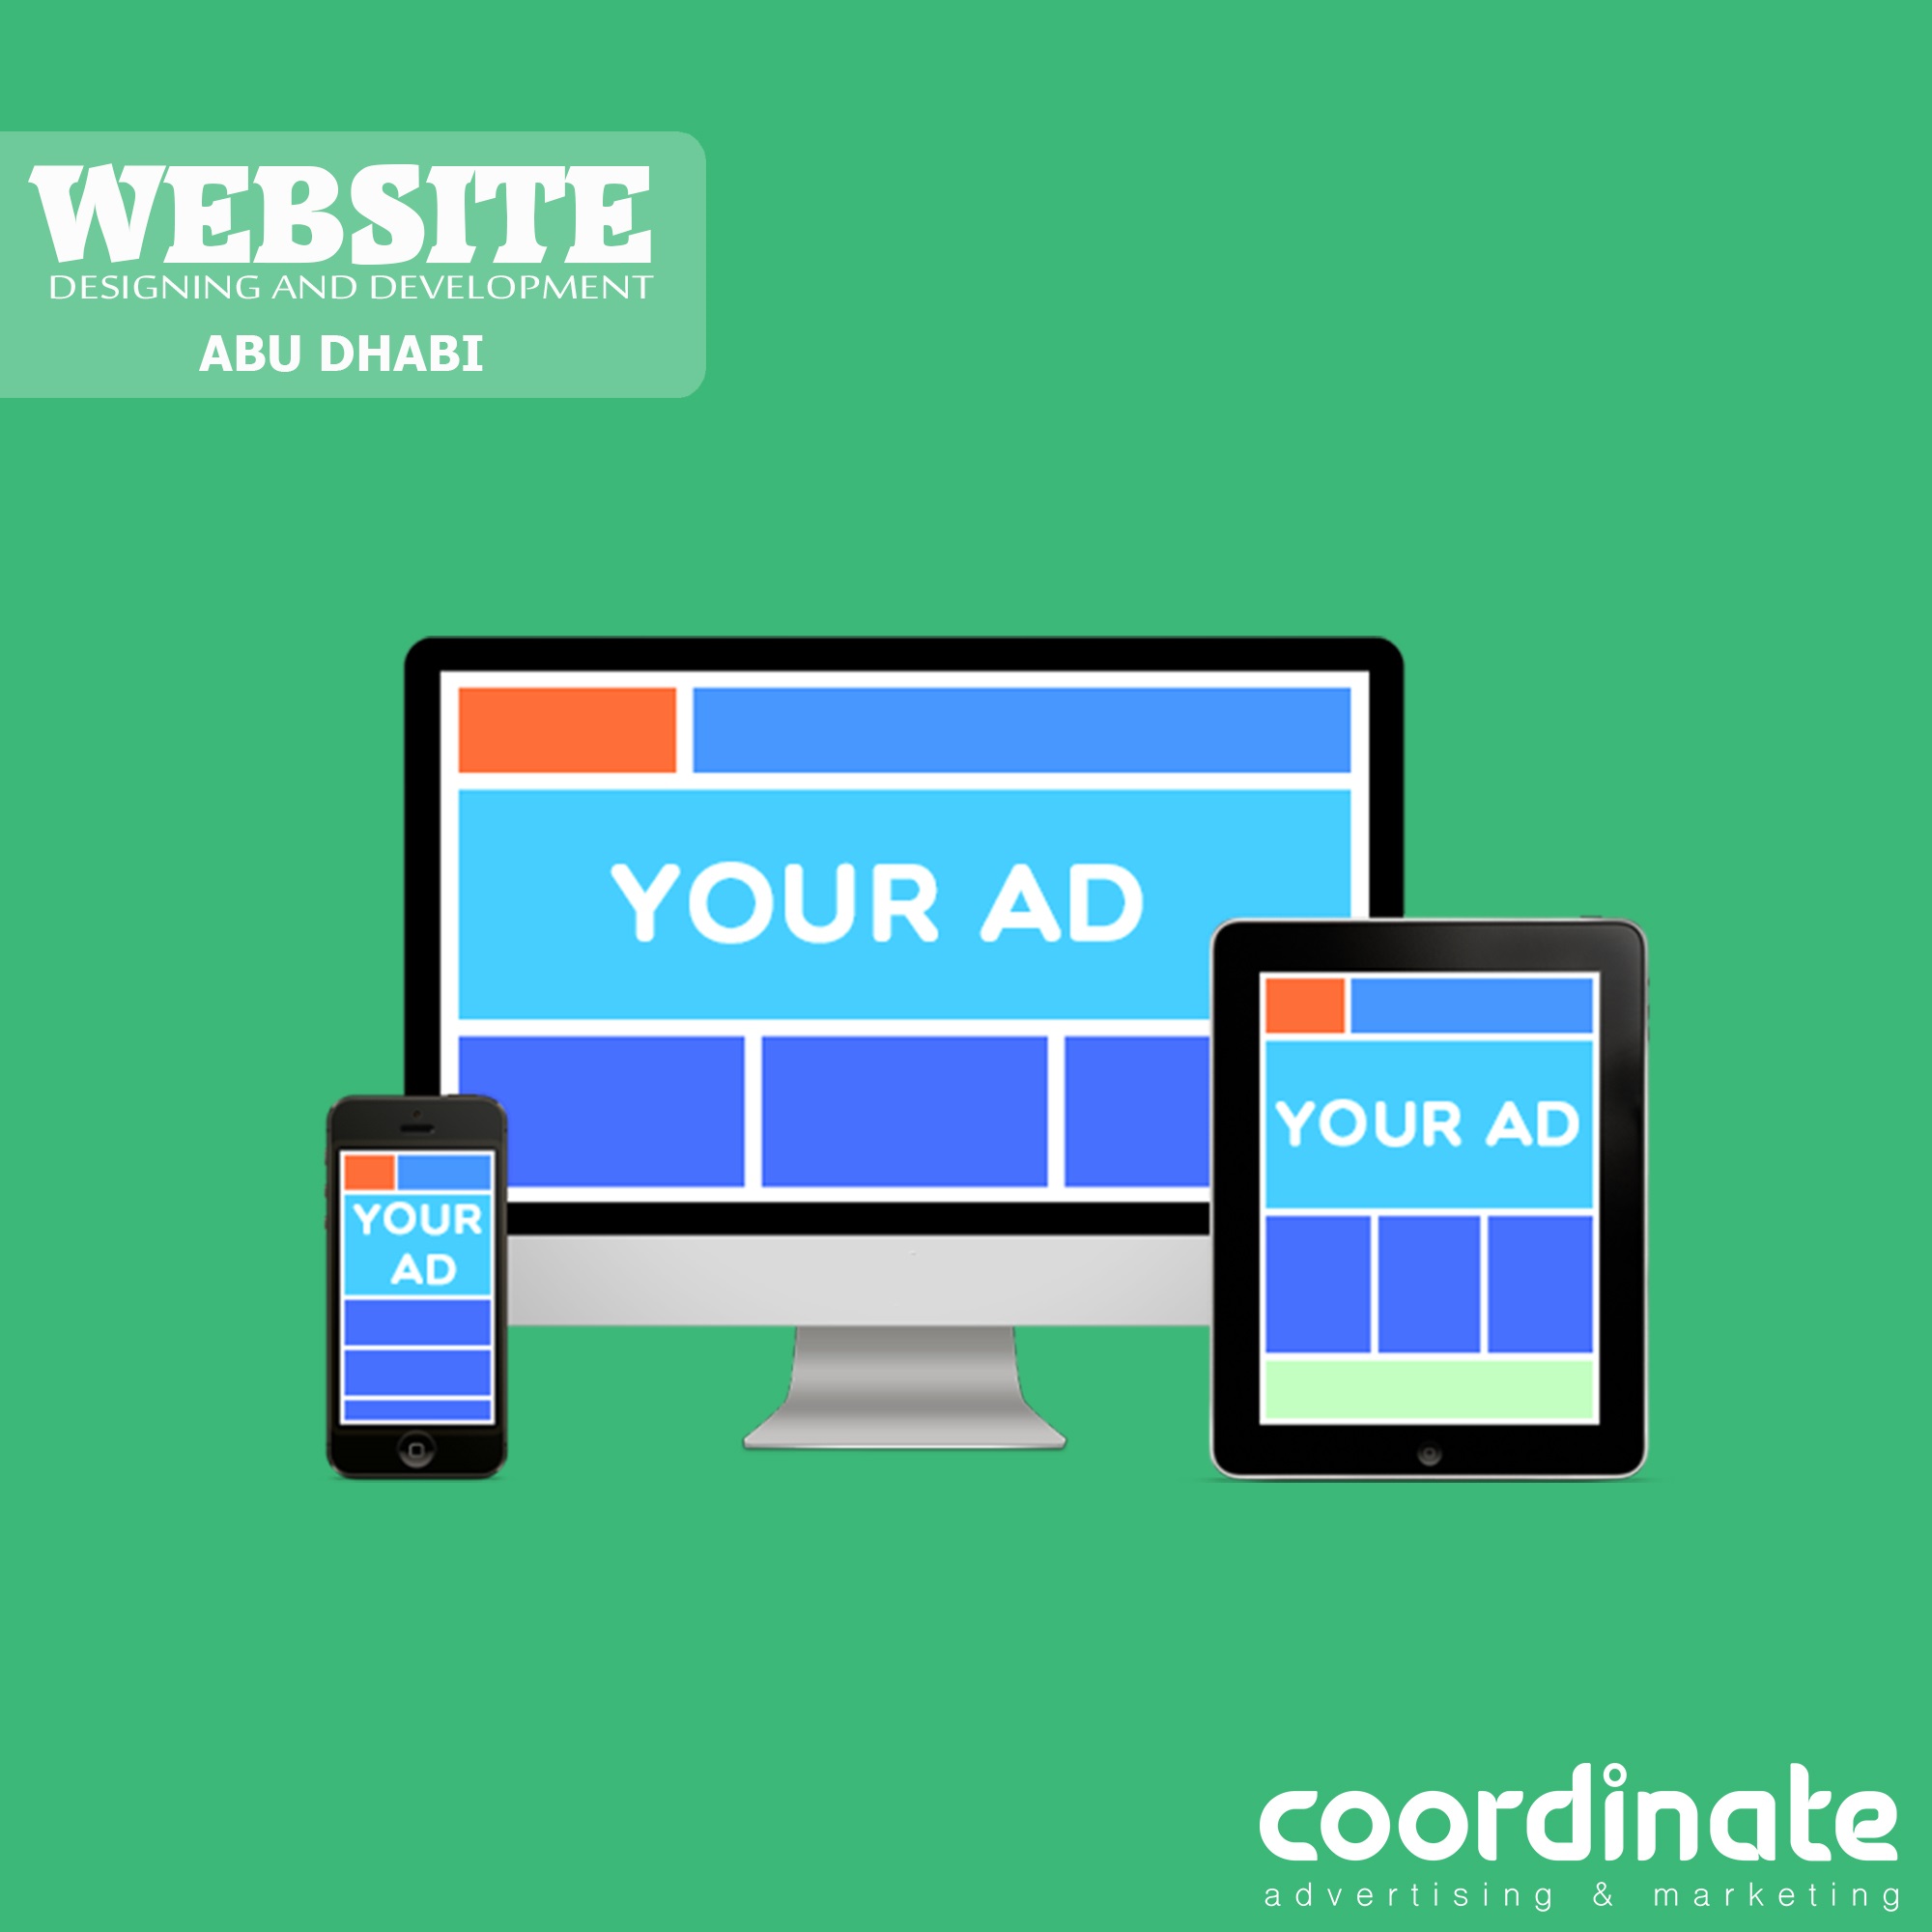 Website Design And Development Services Abu Dhabi | Coordinate advertising and marketing agency